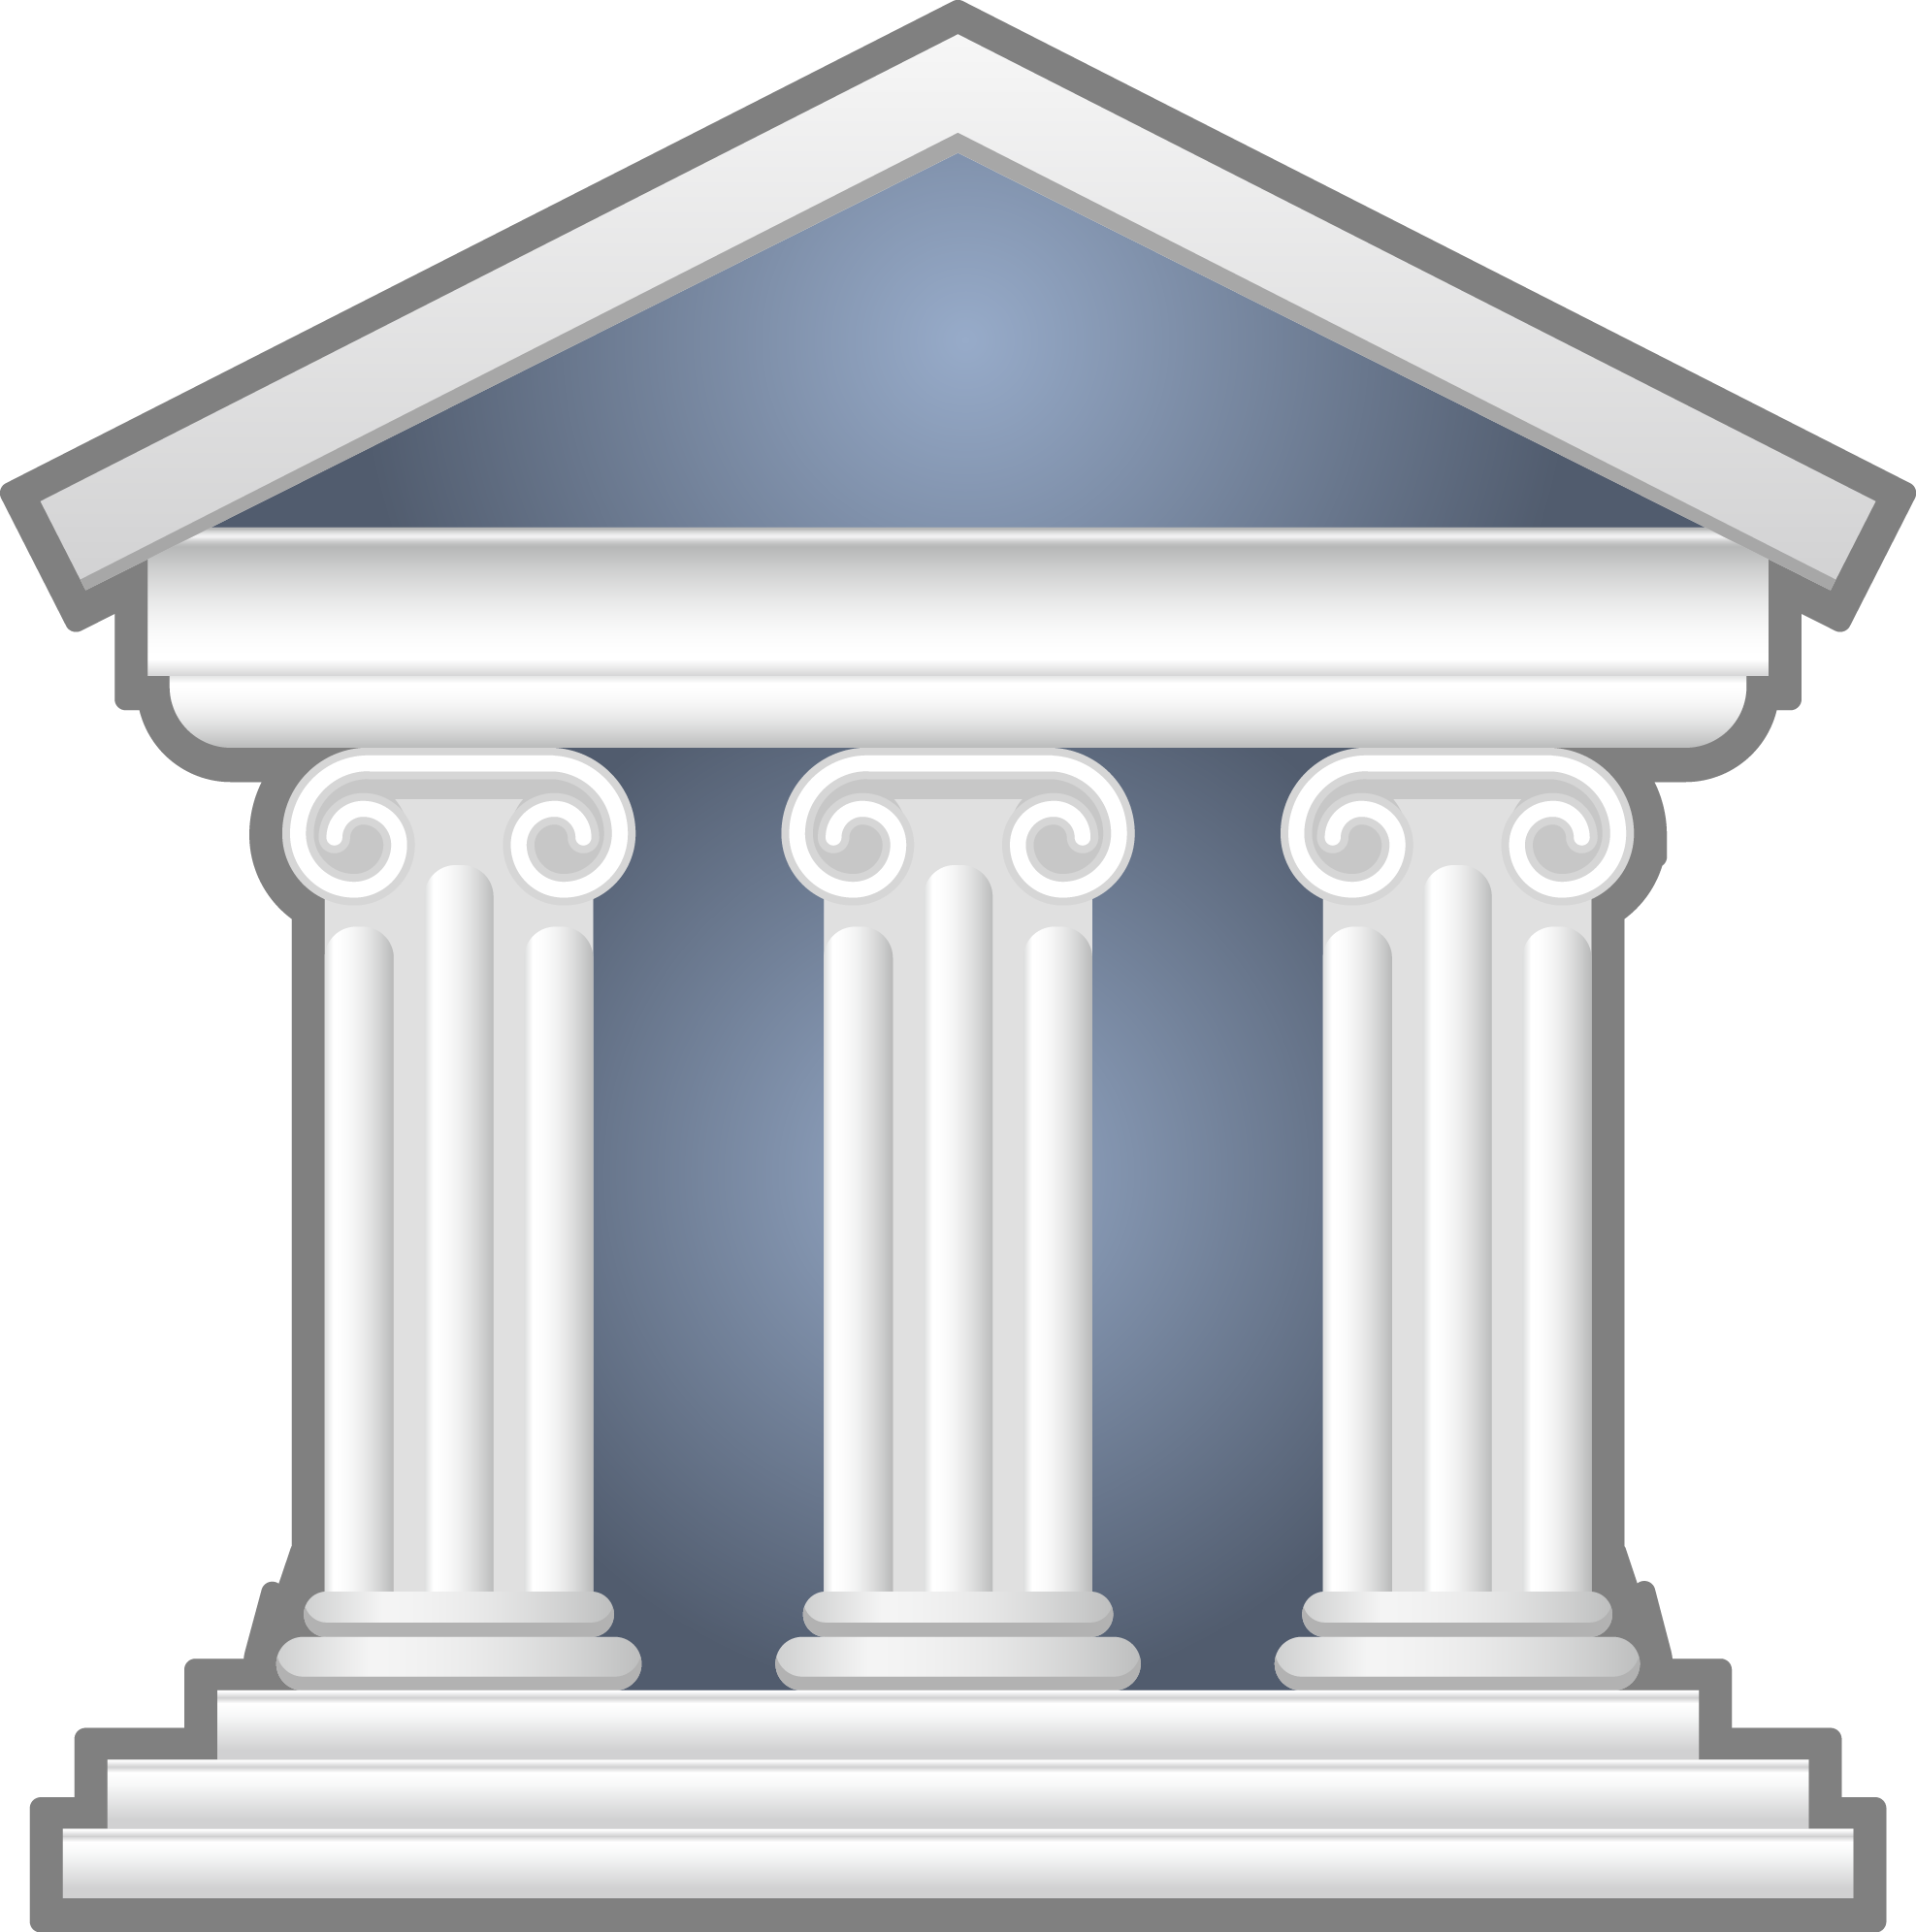 Bank PNG Transparent Images | PNG All